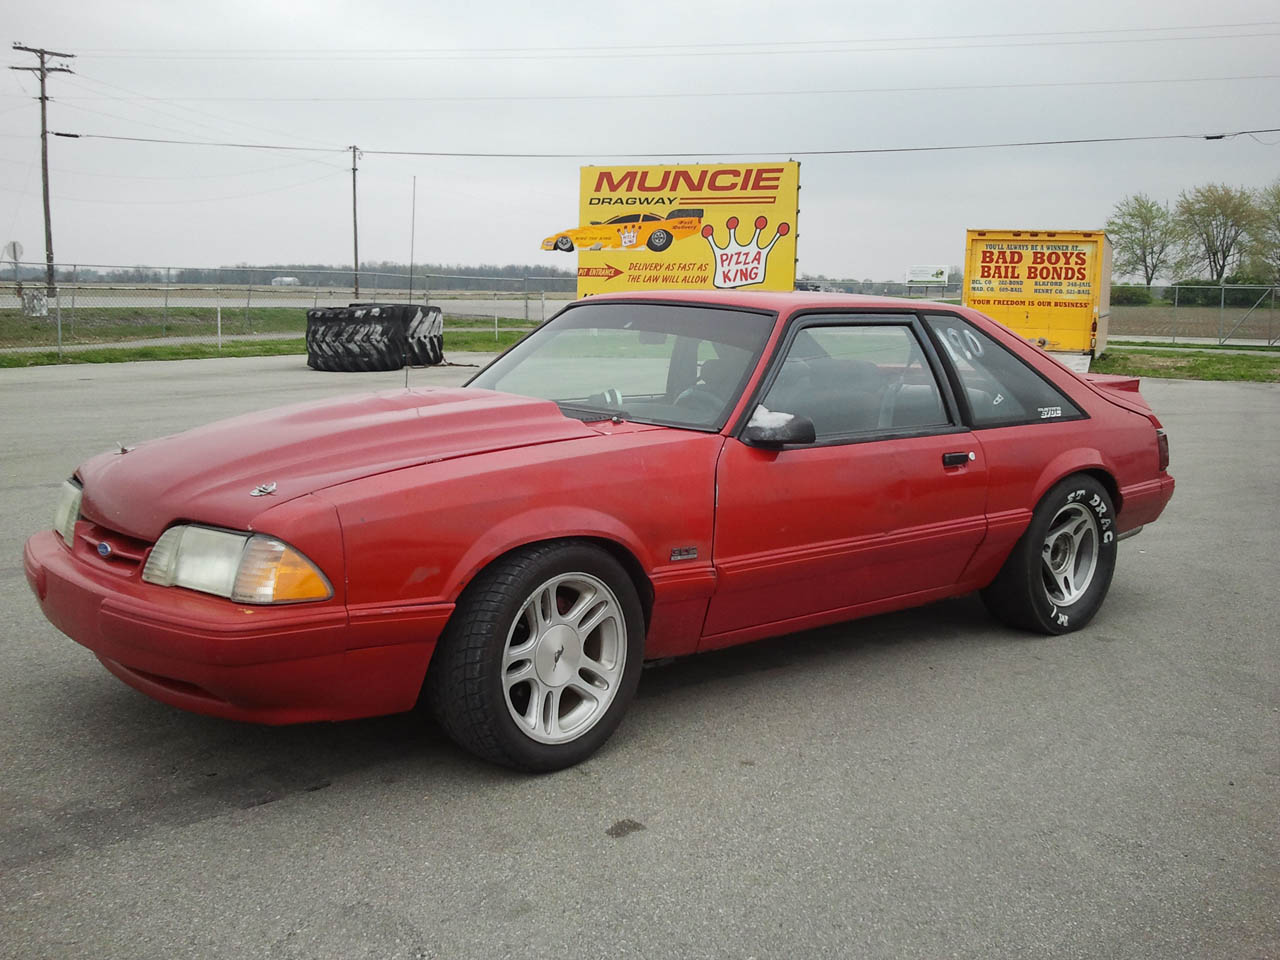 1993 Ford Mustang Lx 302 1 4 Mile Drag Racing Timeslip Specs 0 60 Dragtimes Com